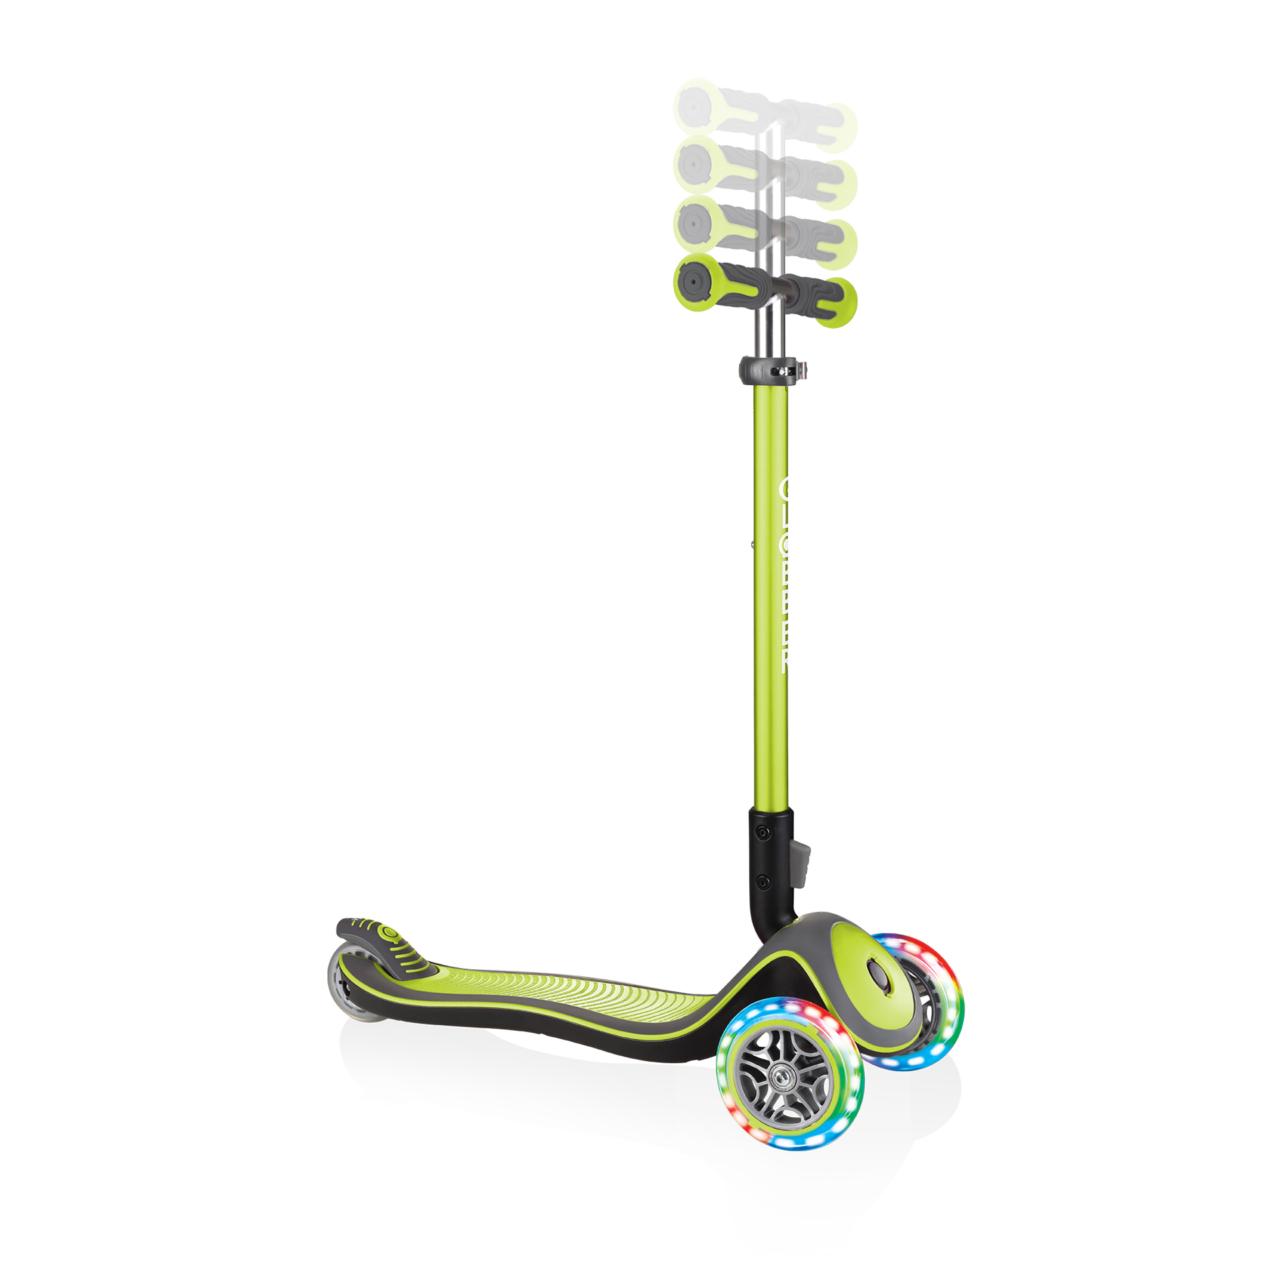 444 406 Green Light Up Scooter With Adjustable T Bar